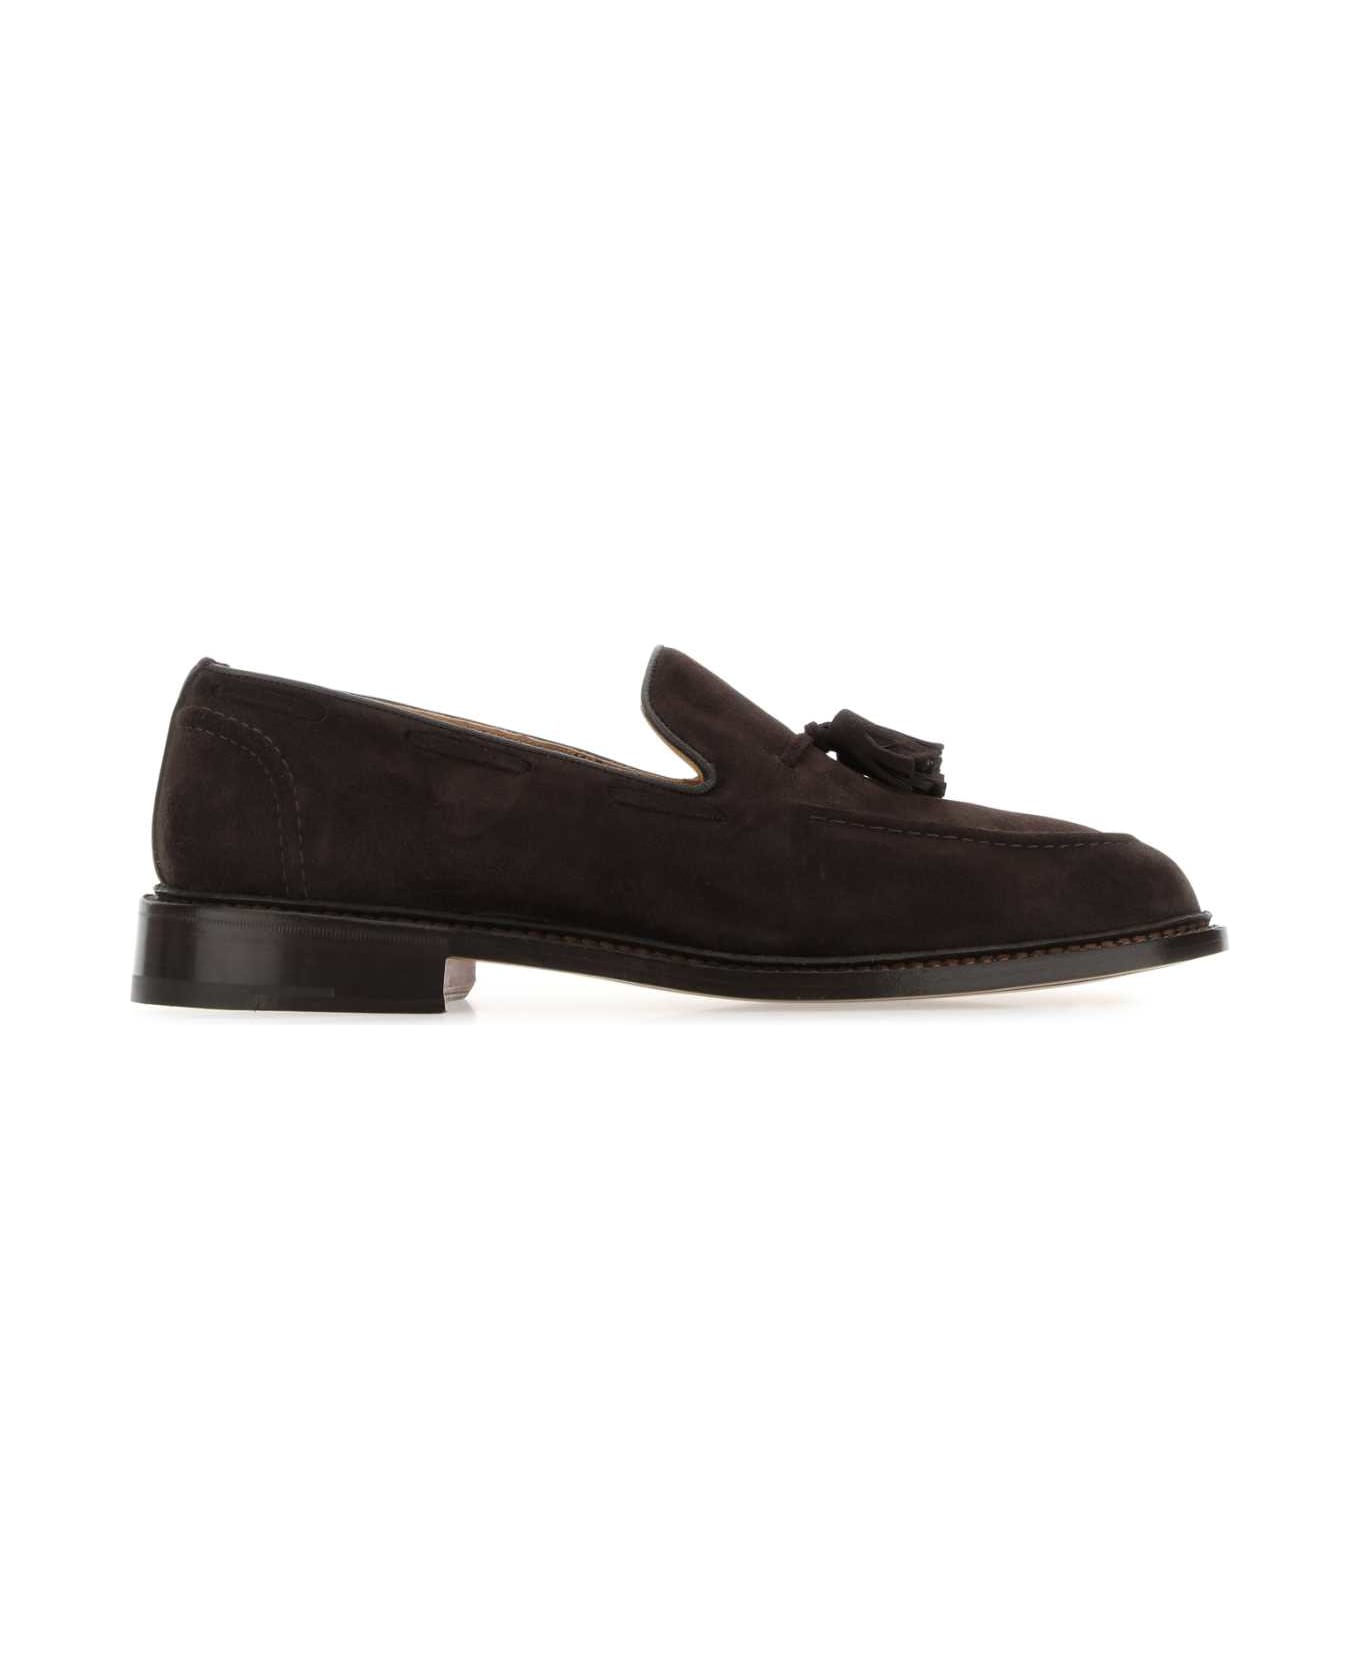 Tricker's Brown Suede Elton Loafers - COFFEE